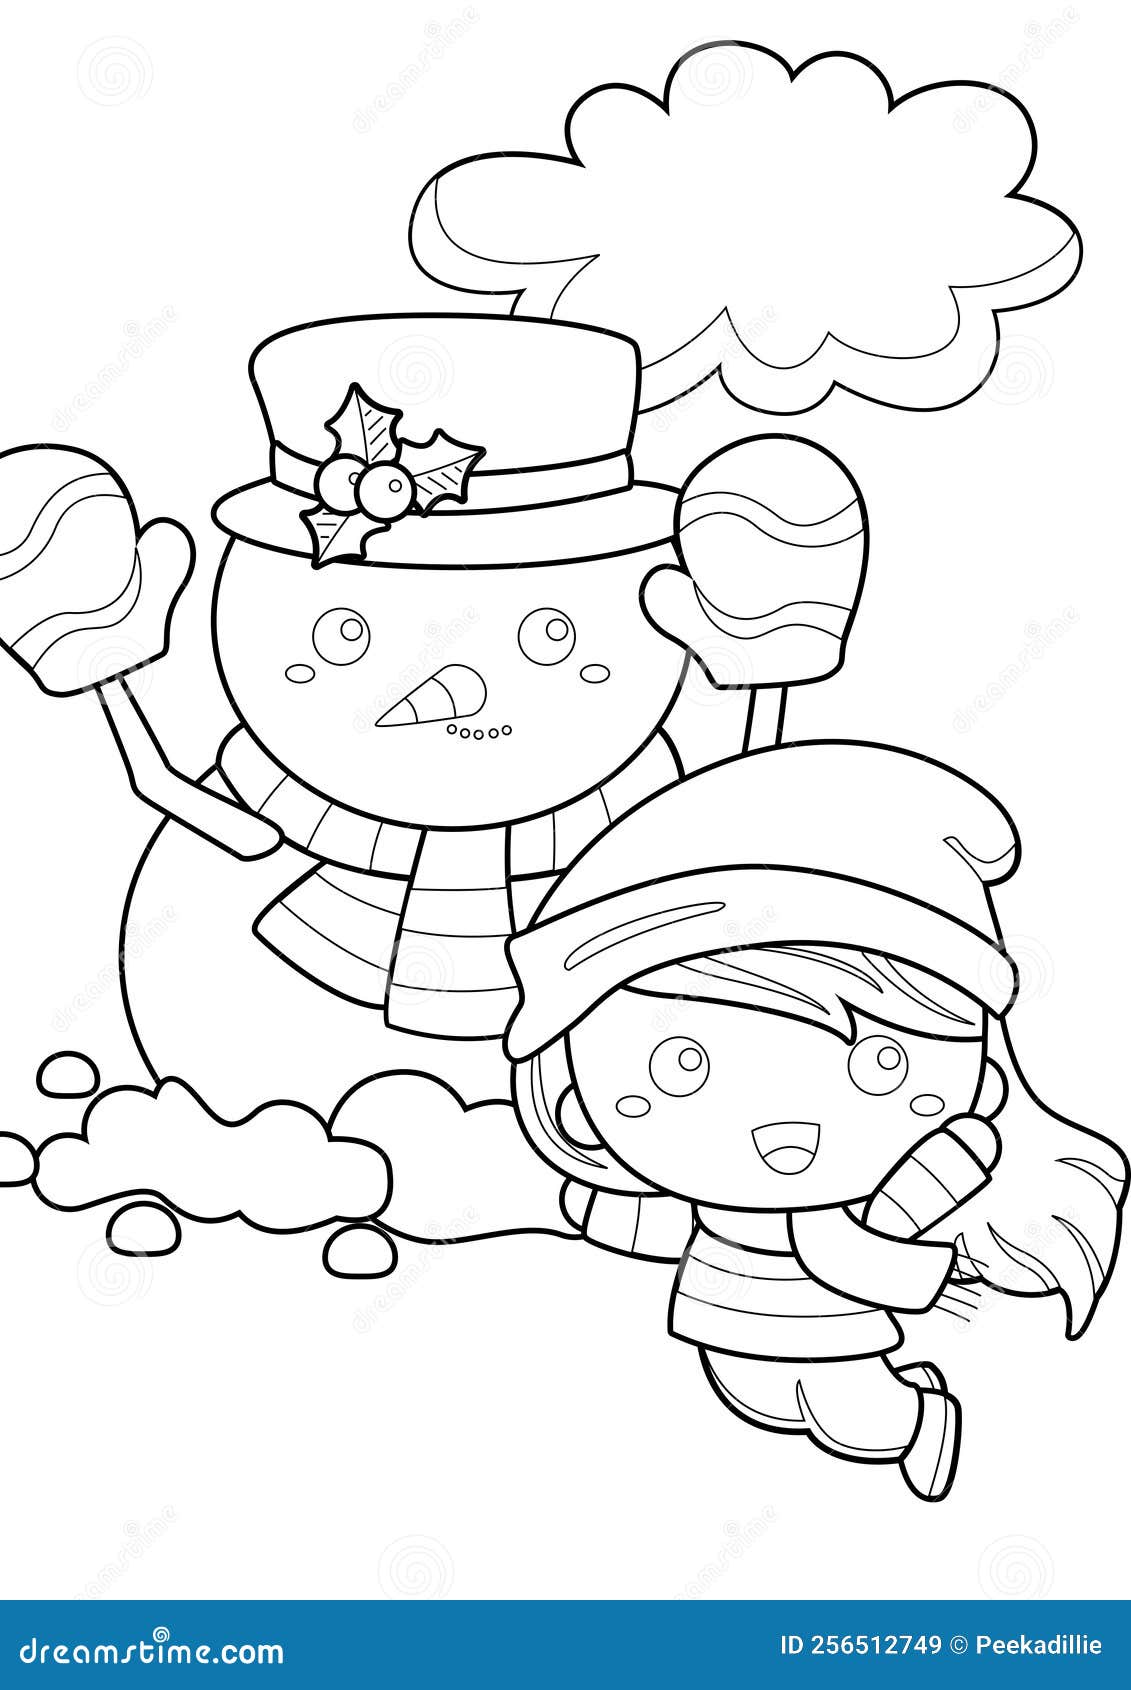 Christmas Coloring Pages, Christmas Coloring Pages For Kids & Adults, by  Kids Drawing Ideas